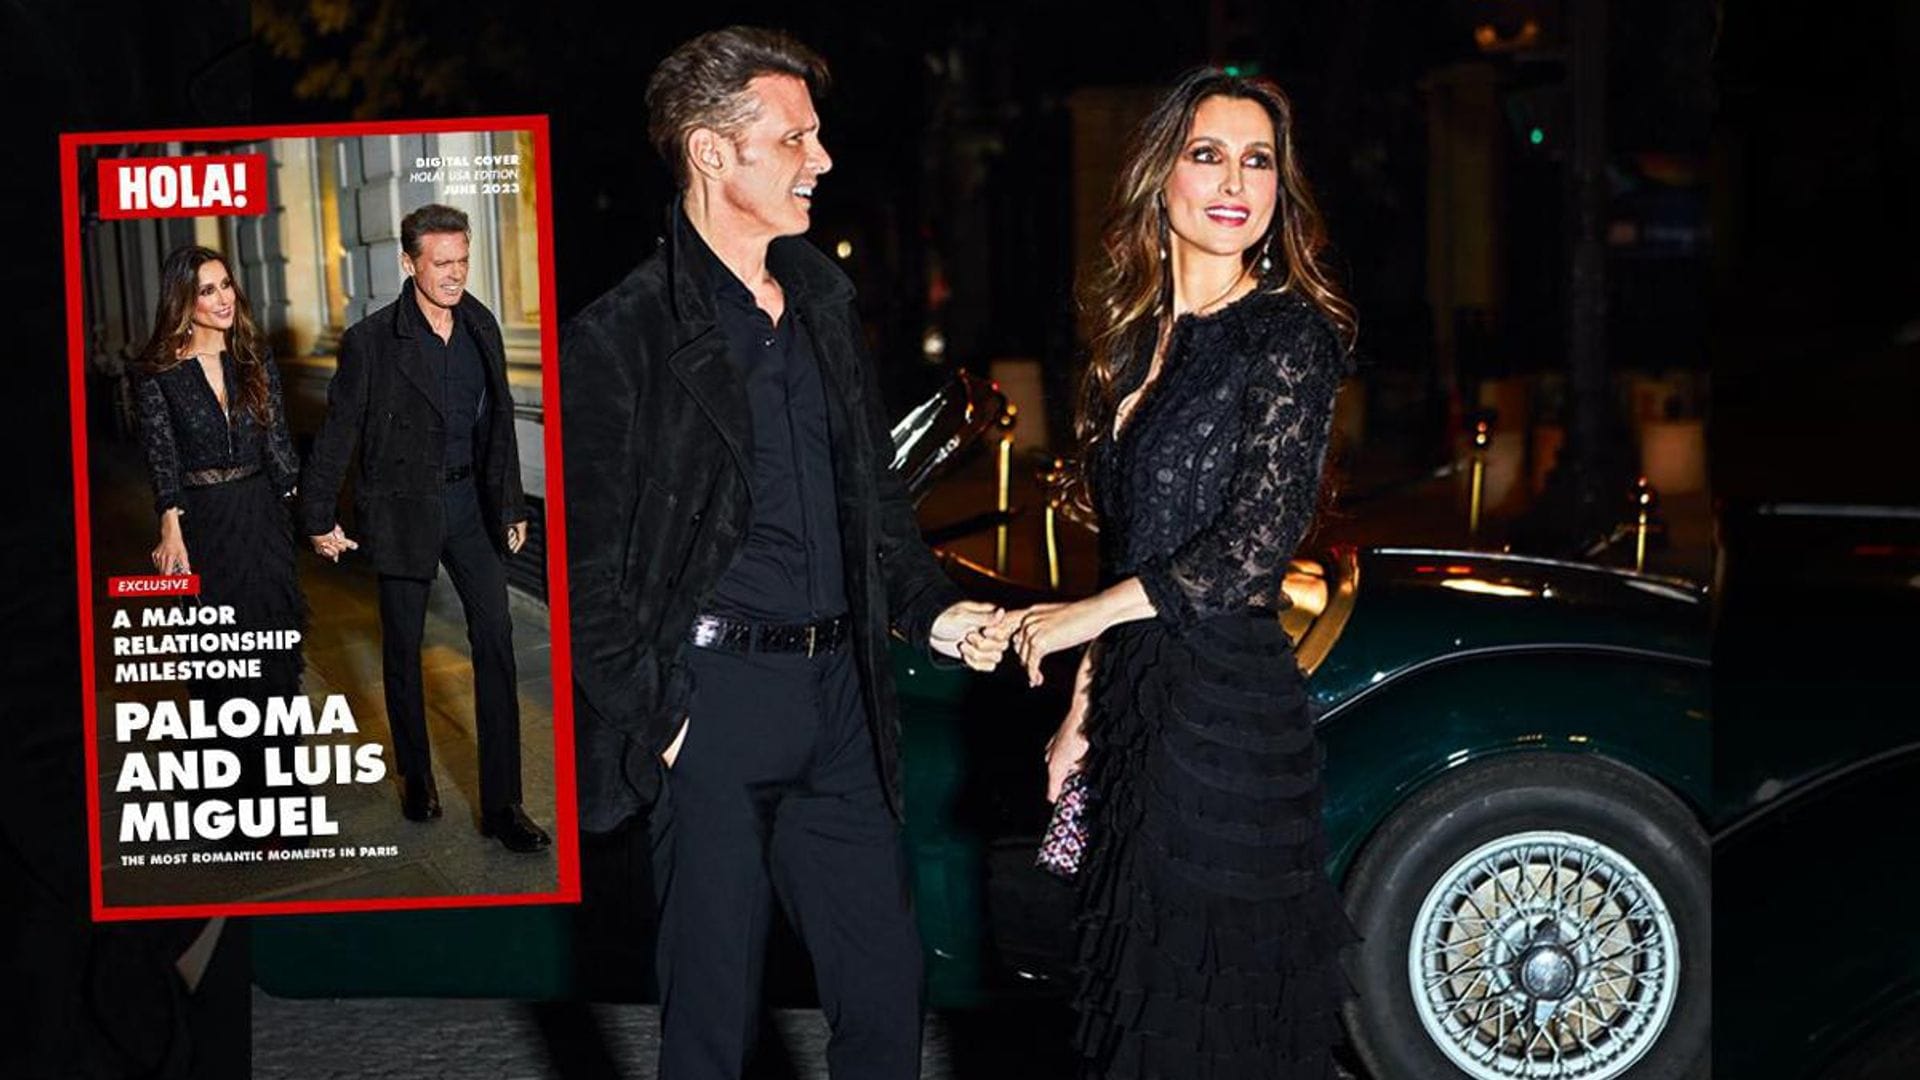 Paloma Cuevas and Luis Miguel's relationship milestone: their most romantic moments in Paris